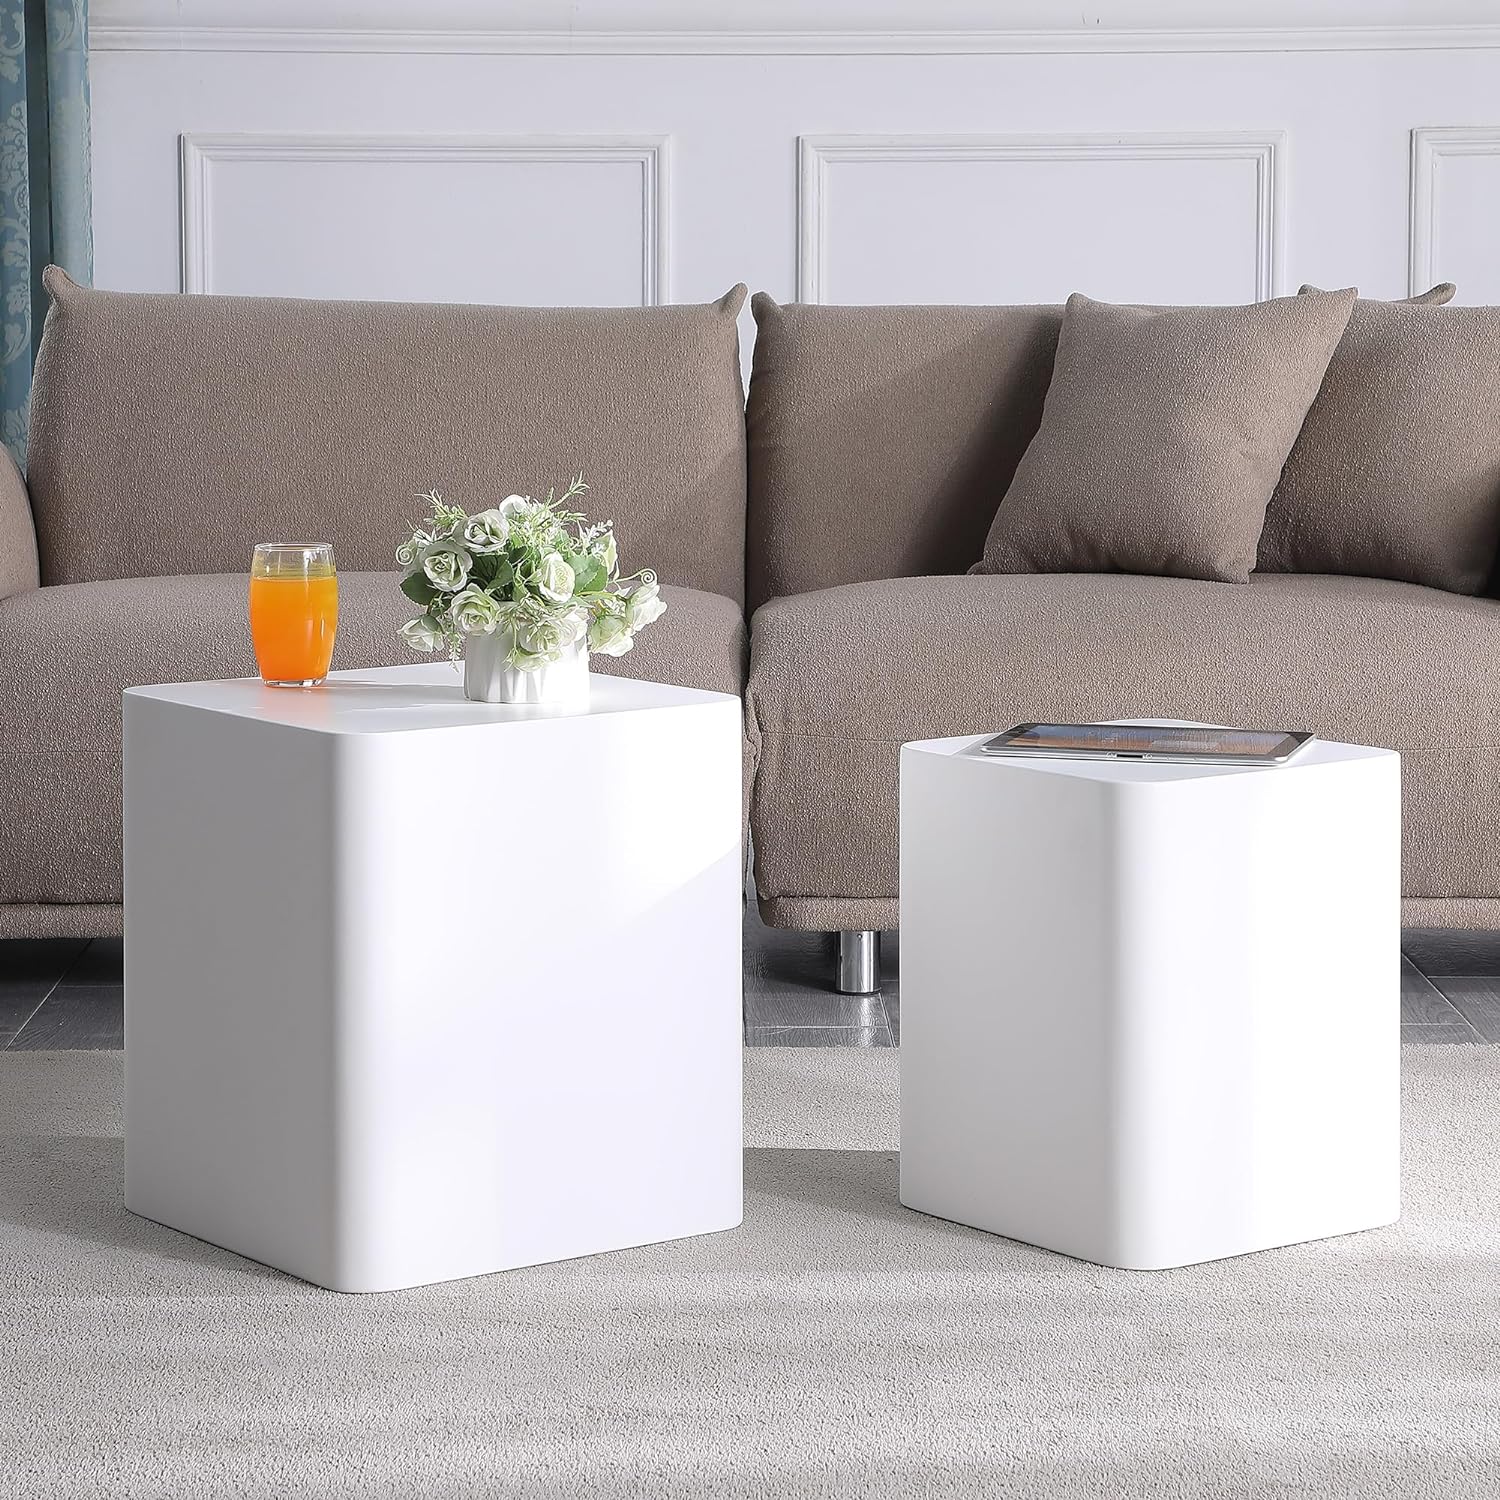 WILLIAMSPACE Nesting Table Set of 2, White Nesting Coffee Tables Wooden Modern Table for Living Room Accent End Side Table, H18.25 (Matte White-Square)